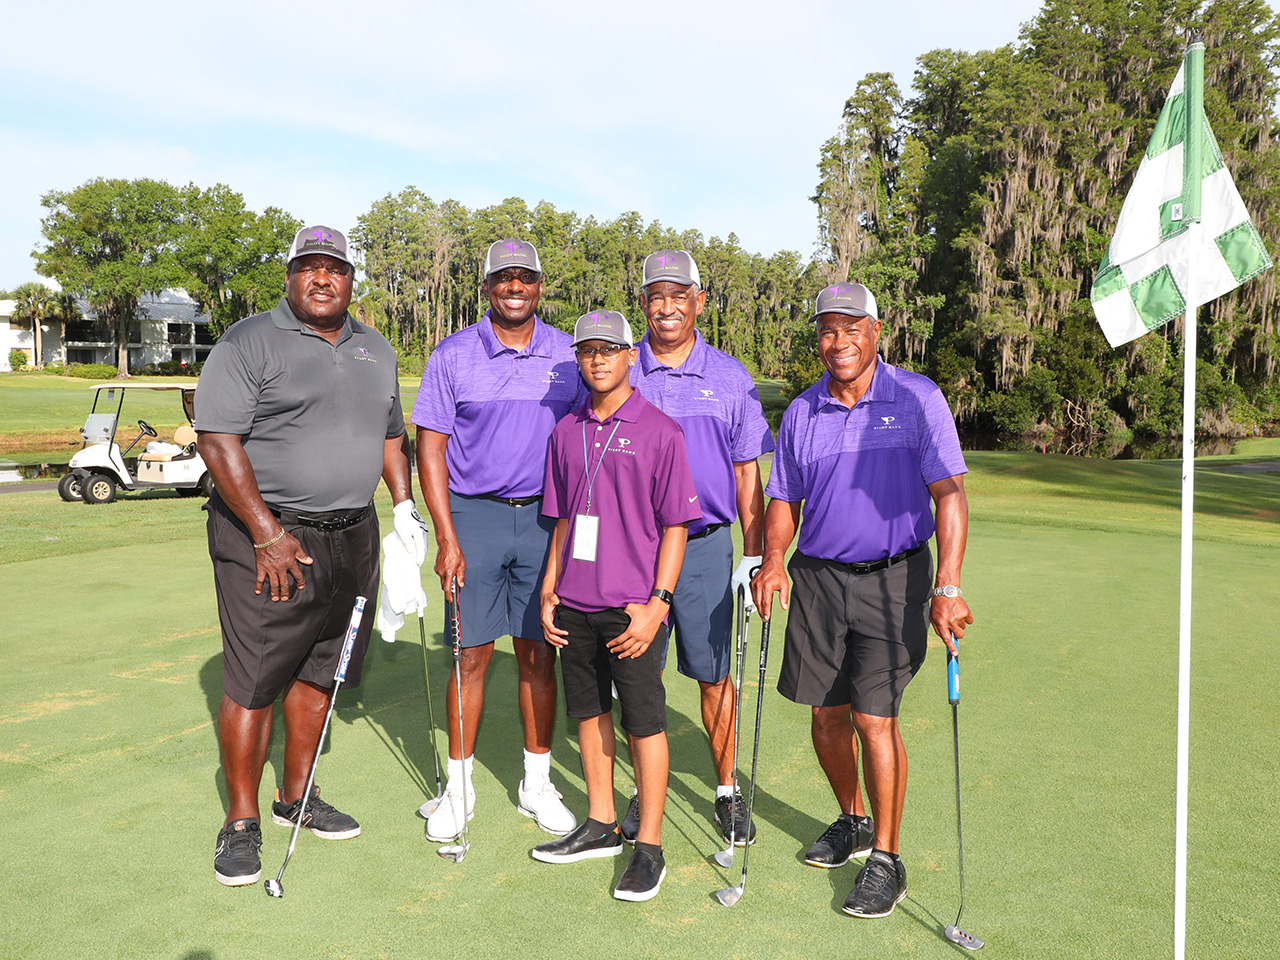 Jimmie Giles and Nat Moore captain their team for the golf tourney